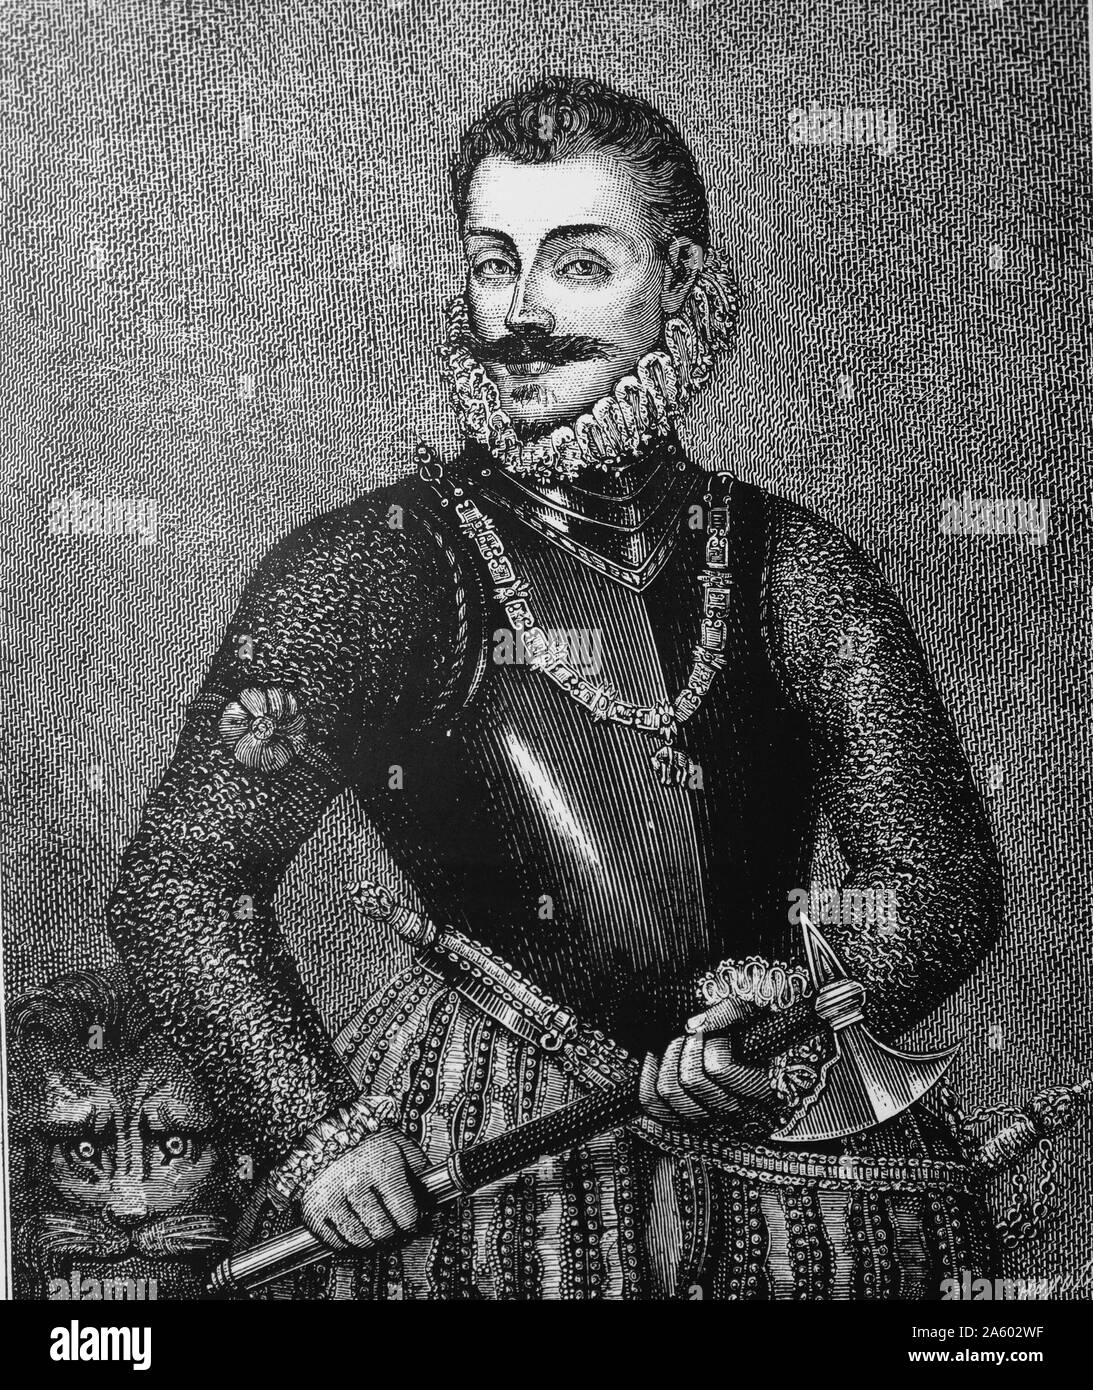 Don JOHN (Juan) of Austria - 1547-1578shown holding a boarding axe as a souvenir of the battle of Lepanto. Illegitimate son of Emperor Charles V, half-brother of Philip II of Spain. Victor of LEPANTO (1571), Governor of the Spanish Netherlands (1576) Stock Photo